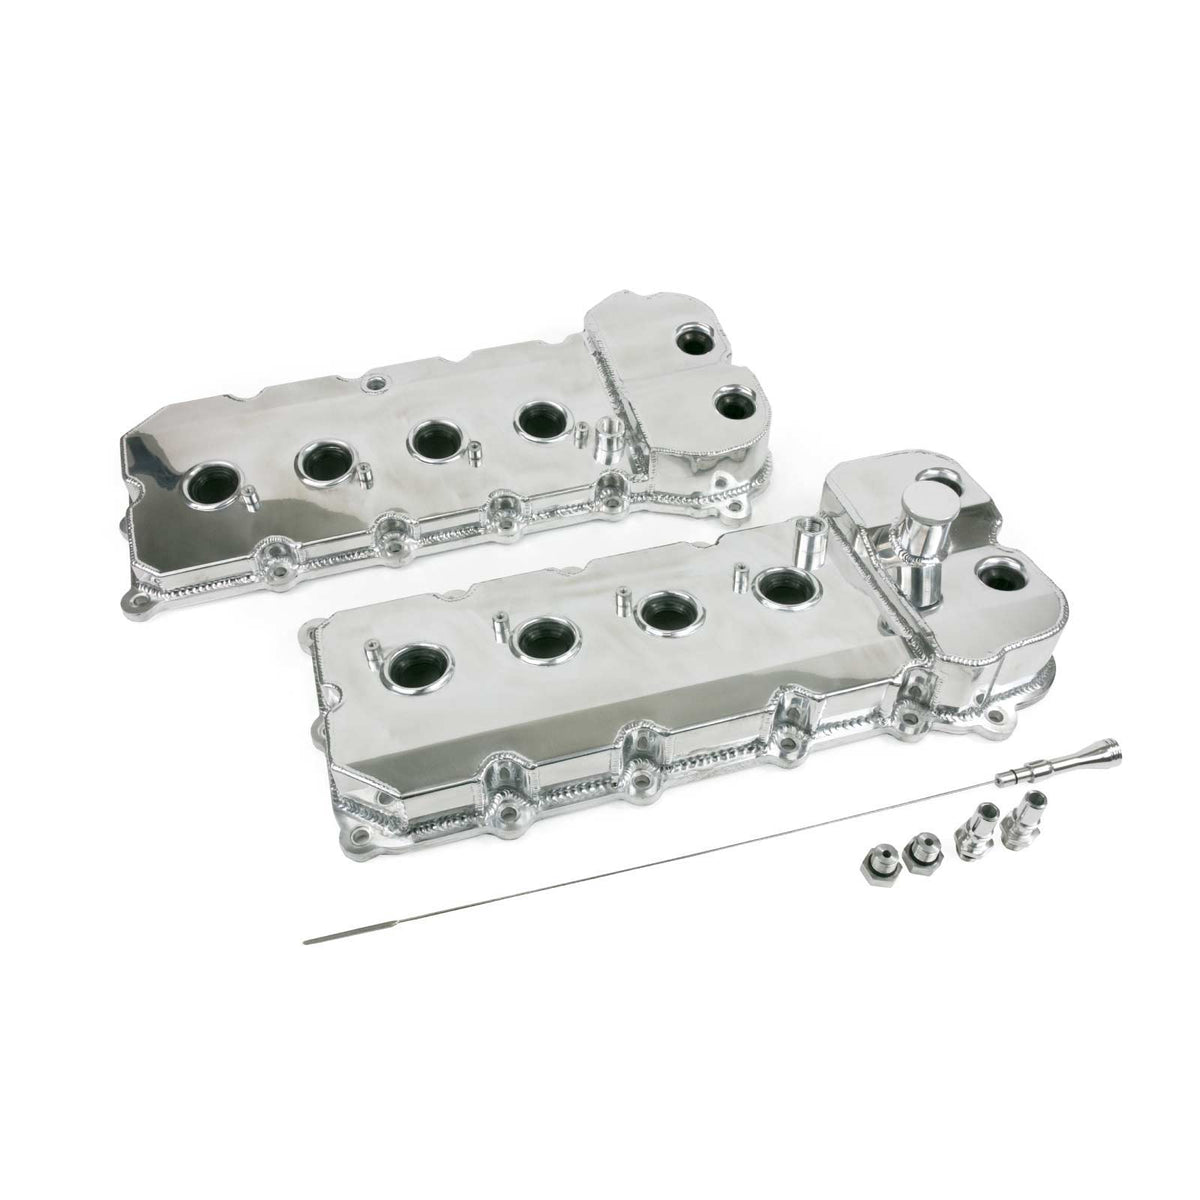 Valve Covers, Ford 5.0 L Coyote Fabricated Aluminum Valve Covers with Dipstick